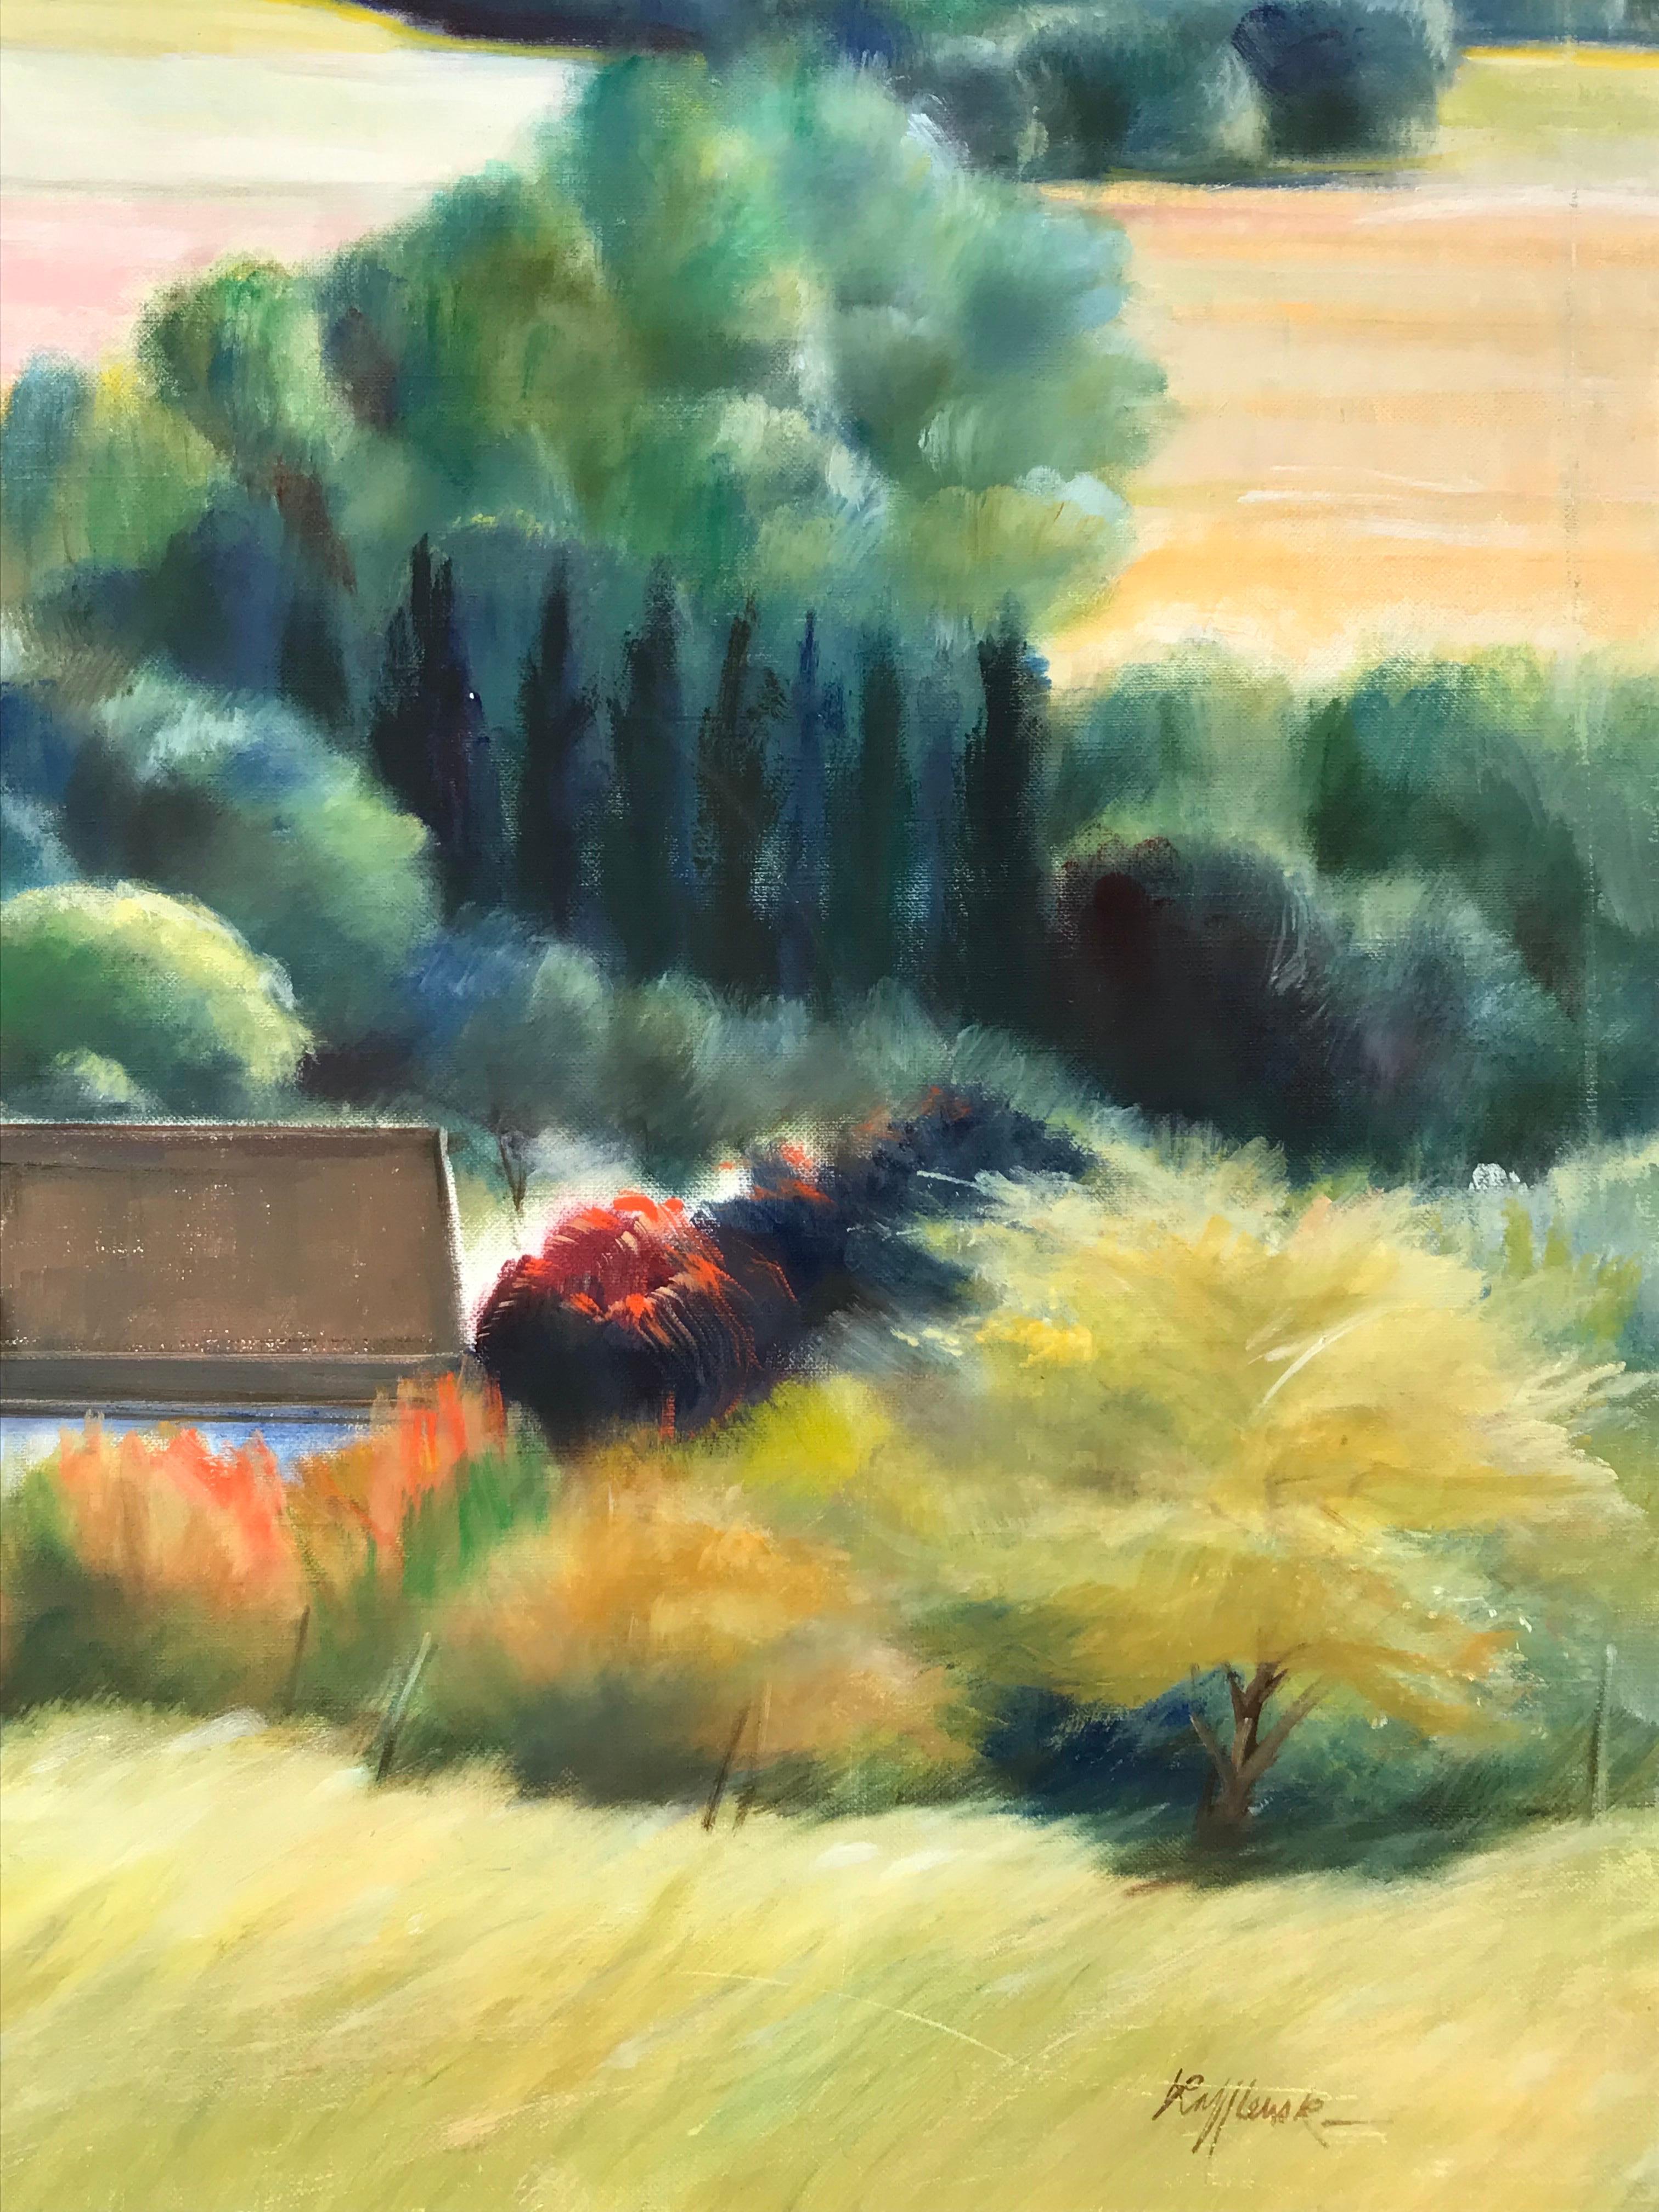 Artist/ School: French School, contemporary, indistinctly signed

Title: The Giverny Landscape

Medium:    oil painting on canvas, unframed, signed
inscribed verso

canvas:   20 x 24 inches

Provenance: private collection, France

Condition: The